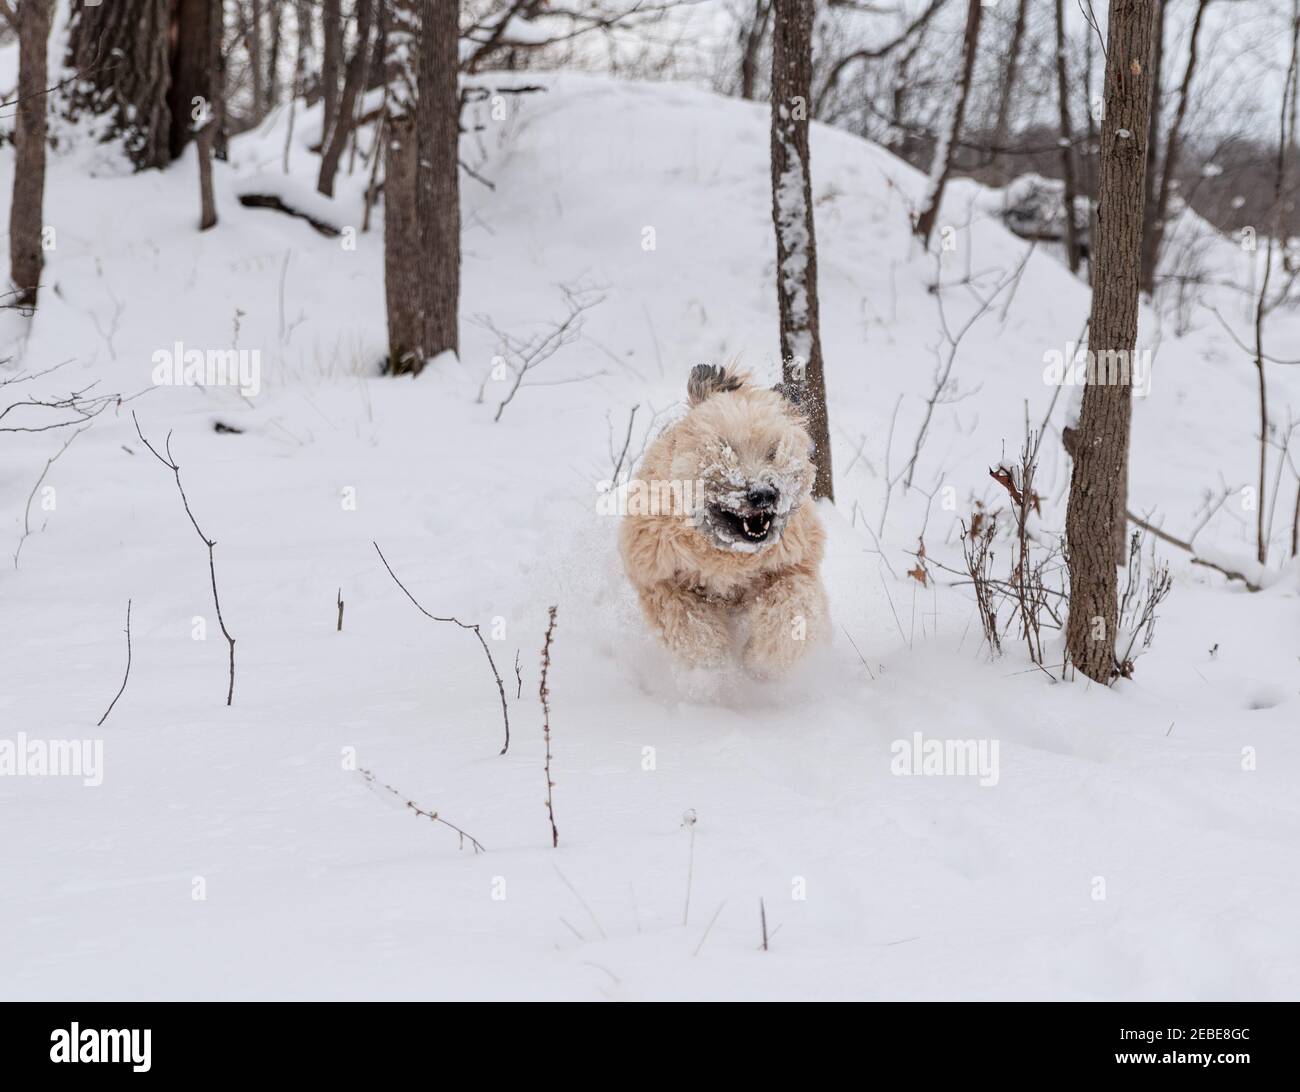 Excited wheaten terrier dog running wildly through snowy wooded area. Stock Photo